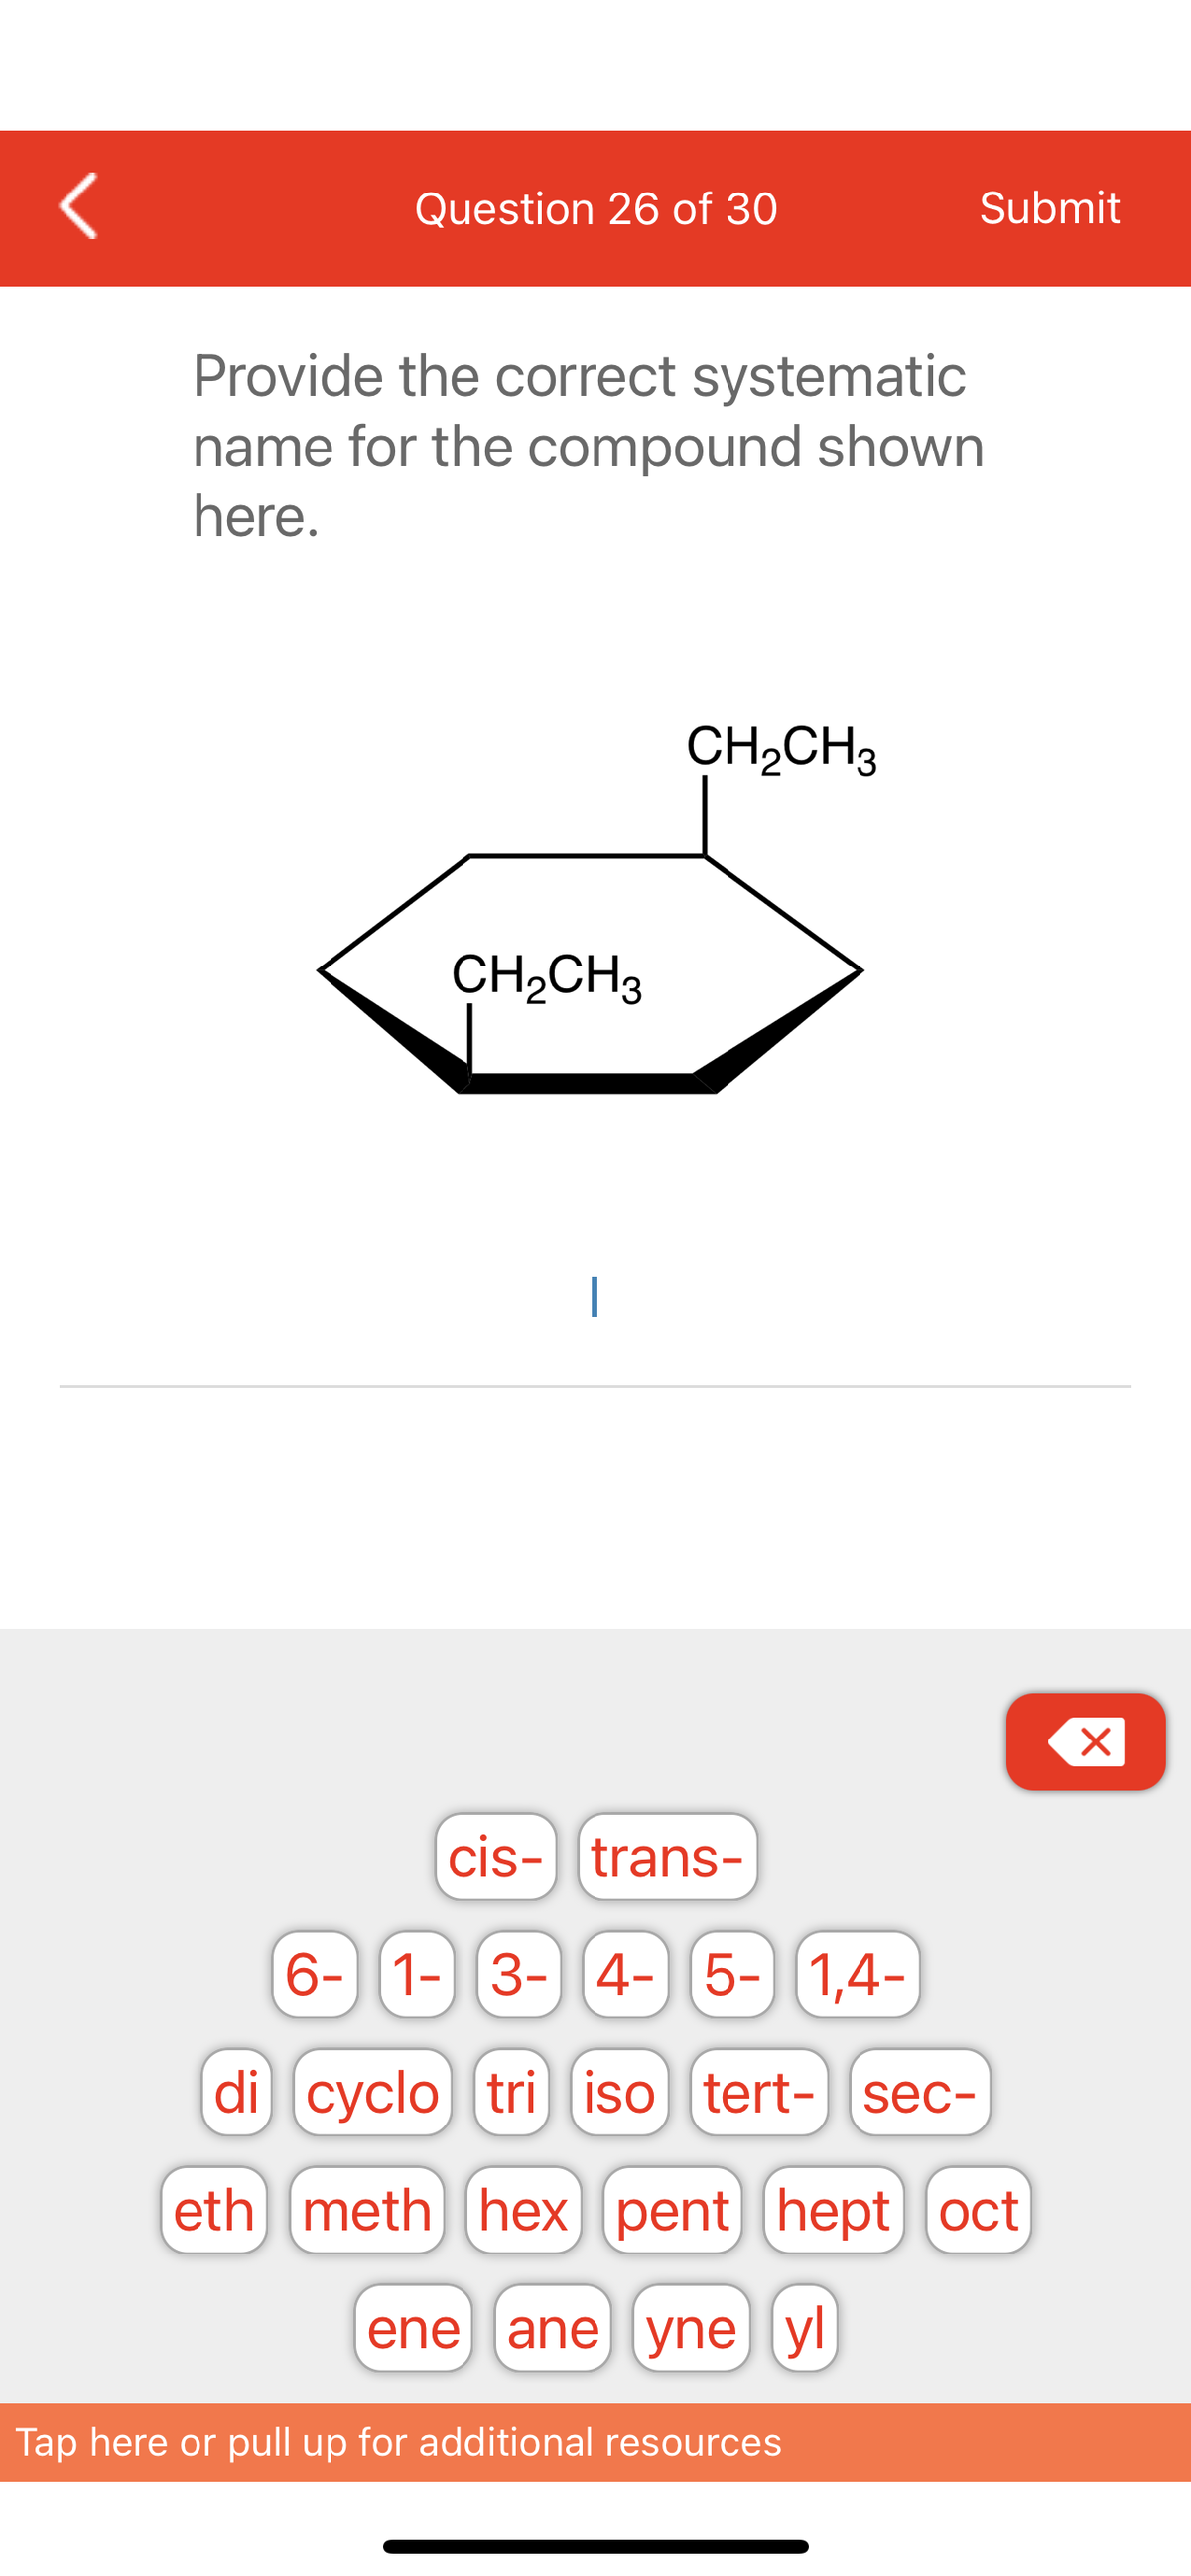 <
Question 26 of 30
Provide the correct systematic
name for the compound shown
here.
CH₂CH3
|
CH₂CH3
Submit
cis-trans-
6- 1- 3- 4- 5- 1,4-
di
cyclo tri iso tert- sec-
(eth meth hex (pent hept) oct
ene ane yne yl
Tap here or pull up for additional resources
X